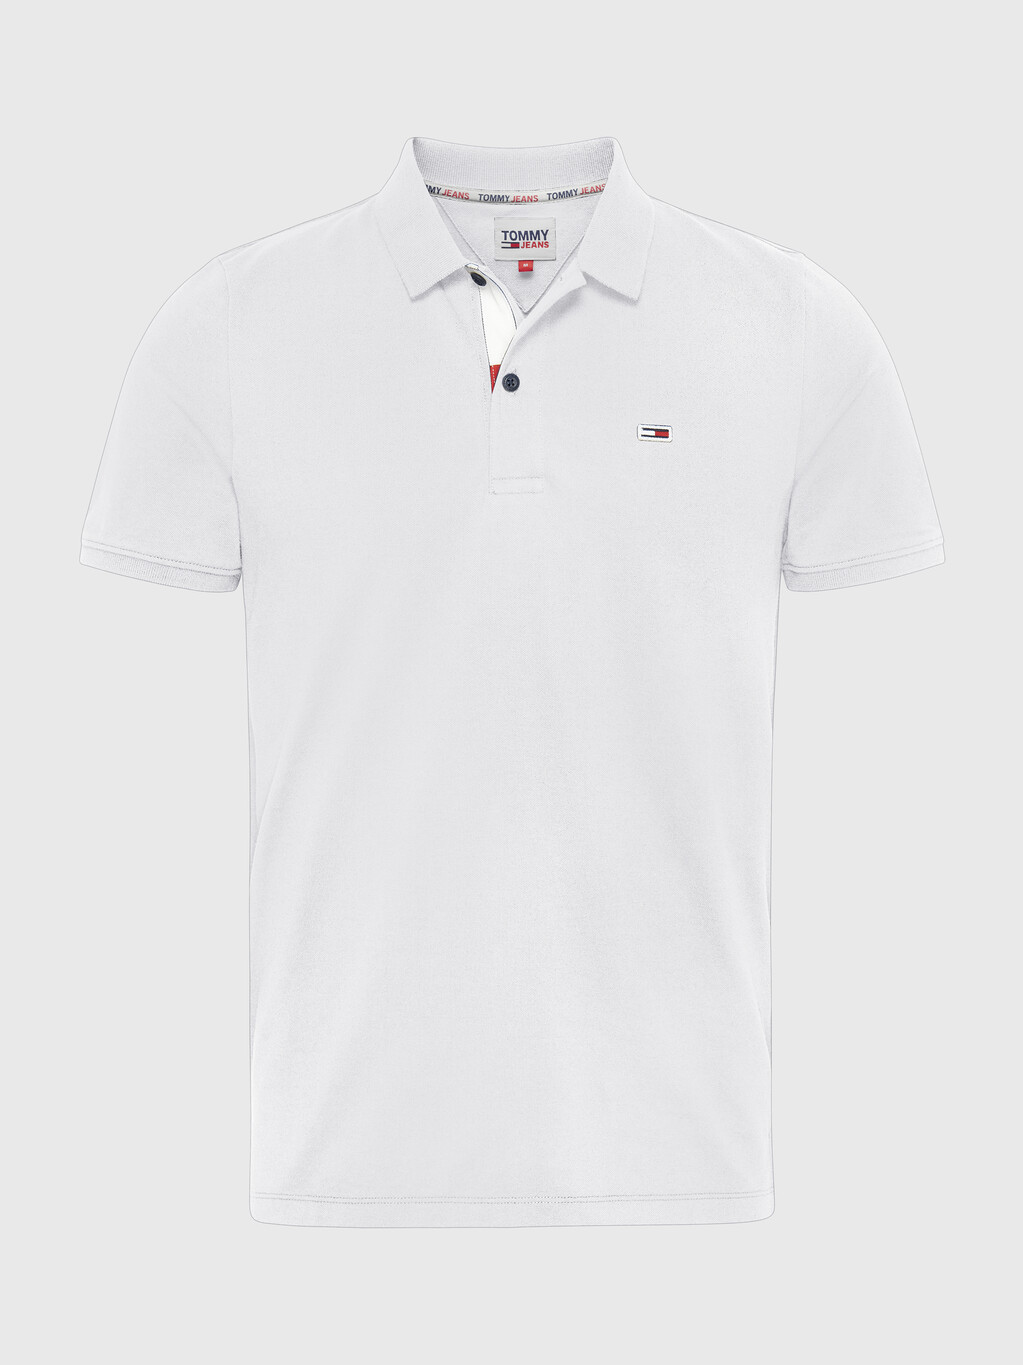 Tommy Jeans 旗幟修身 Polo 衫, White, hi-res